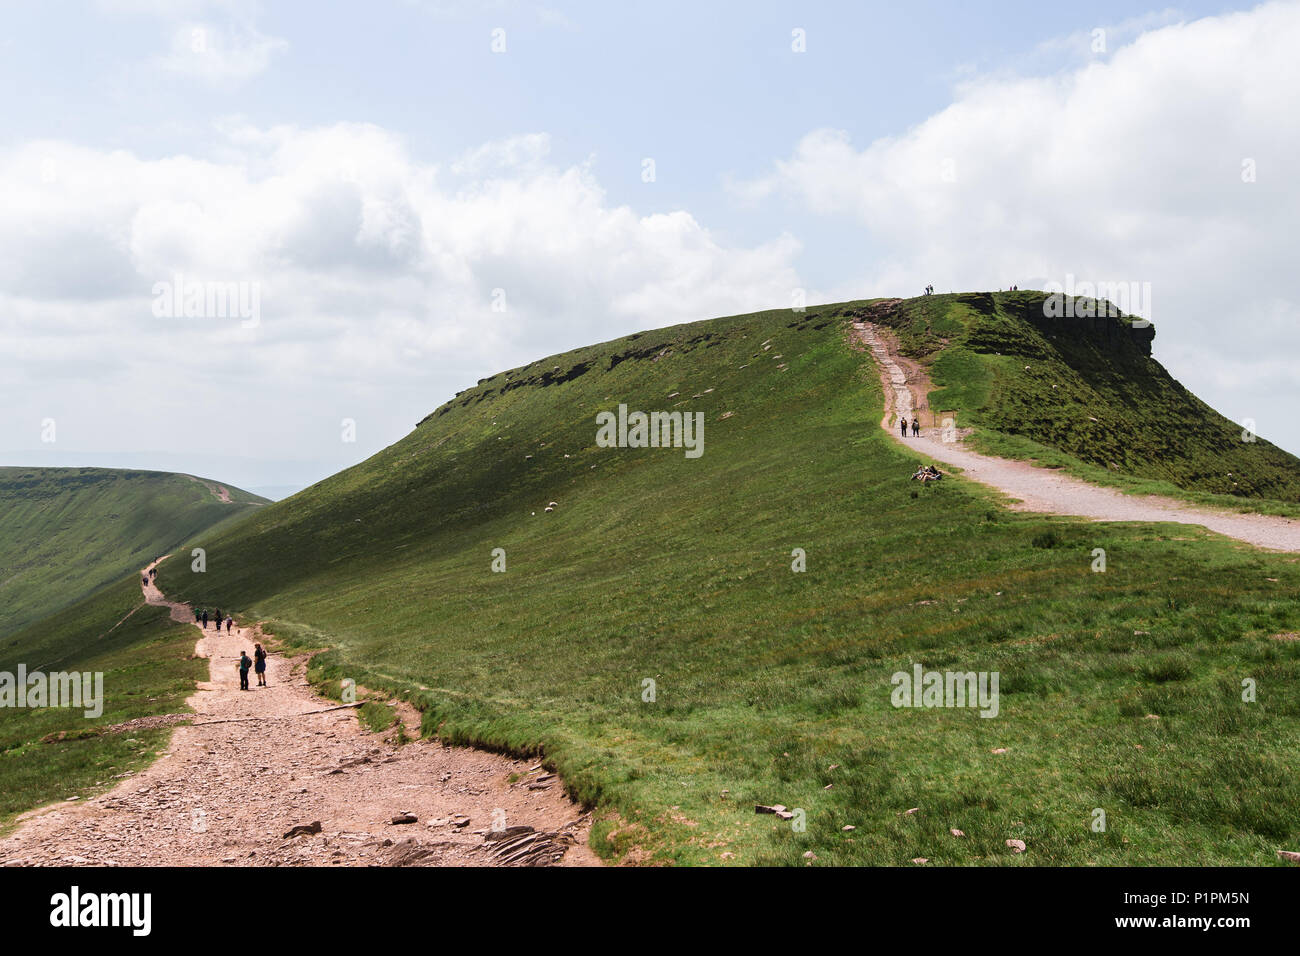 Corn Du - a mountain in the Brecon Beacons National Park, Wales, UK Stock Photo